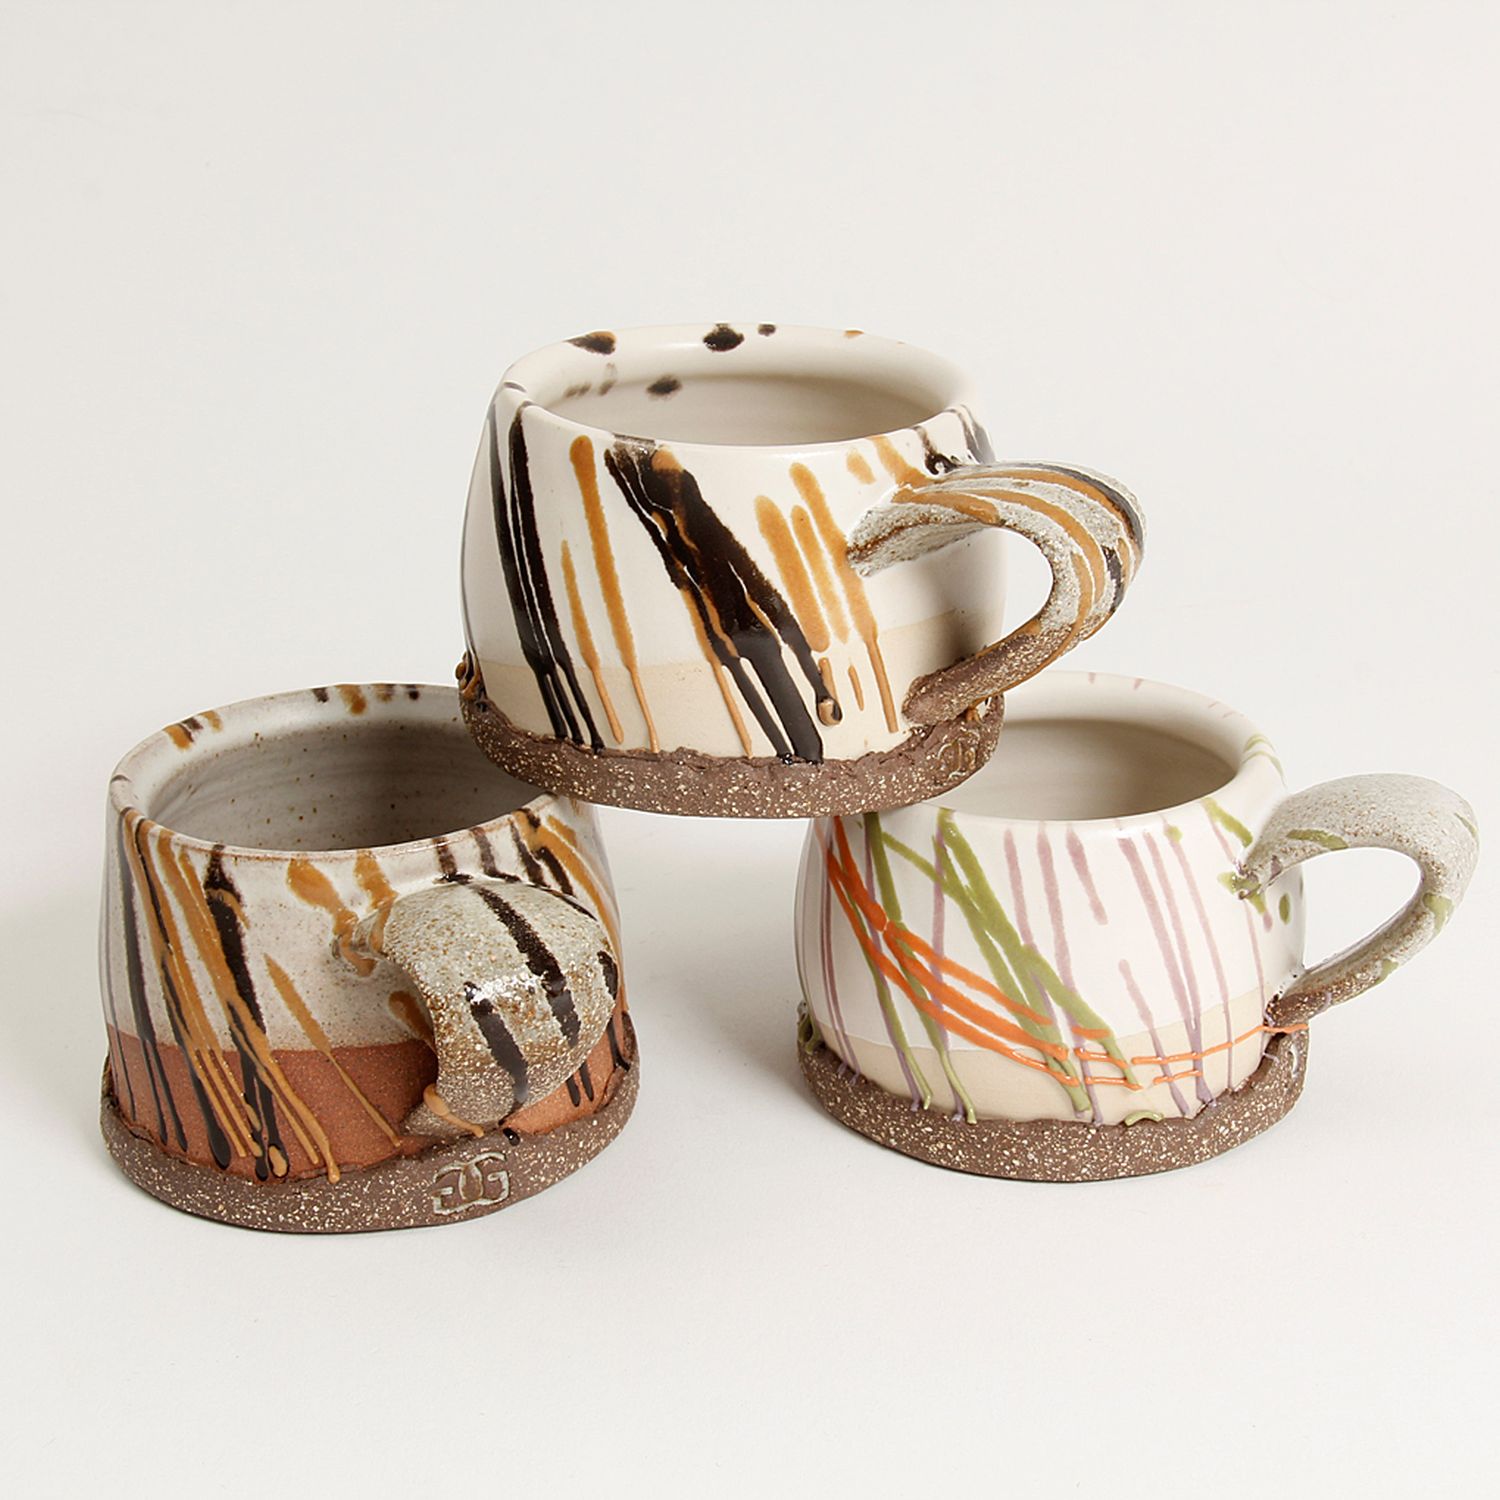 Gracia Isabel Gomez: Espresso mug in Brown Chocolate Product Image 2 of 6